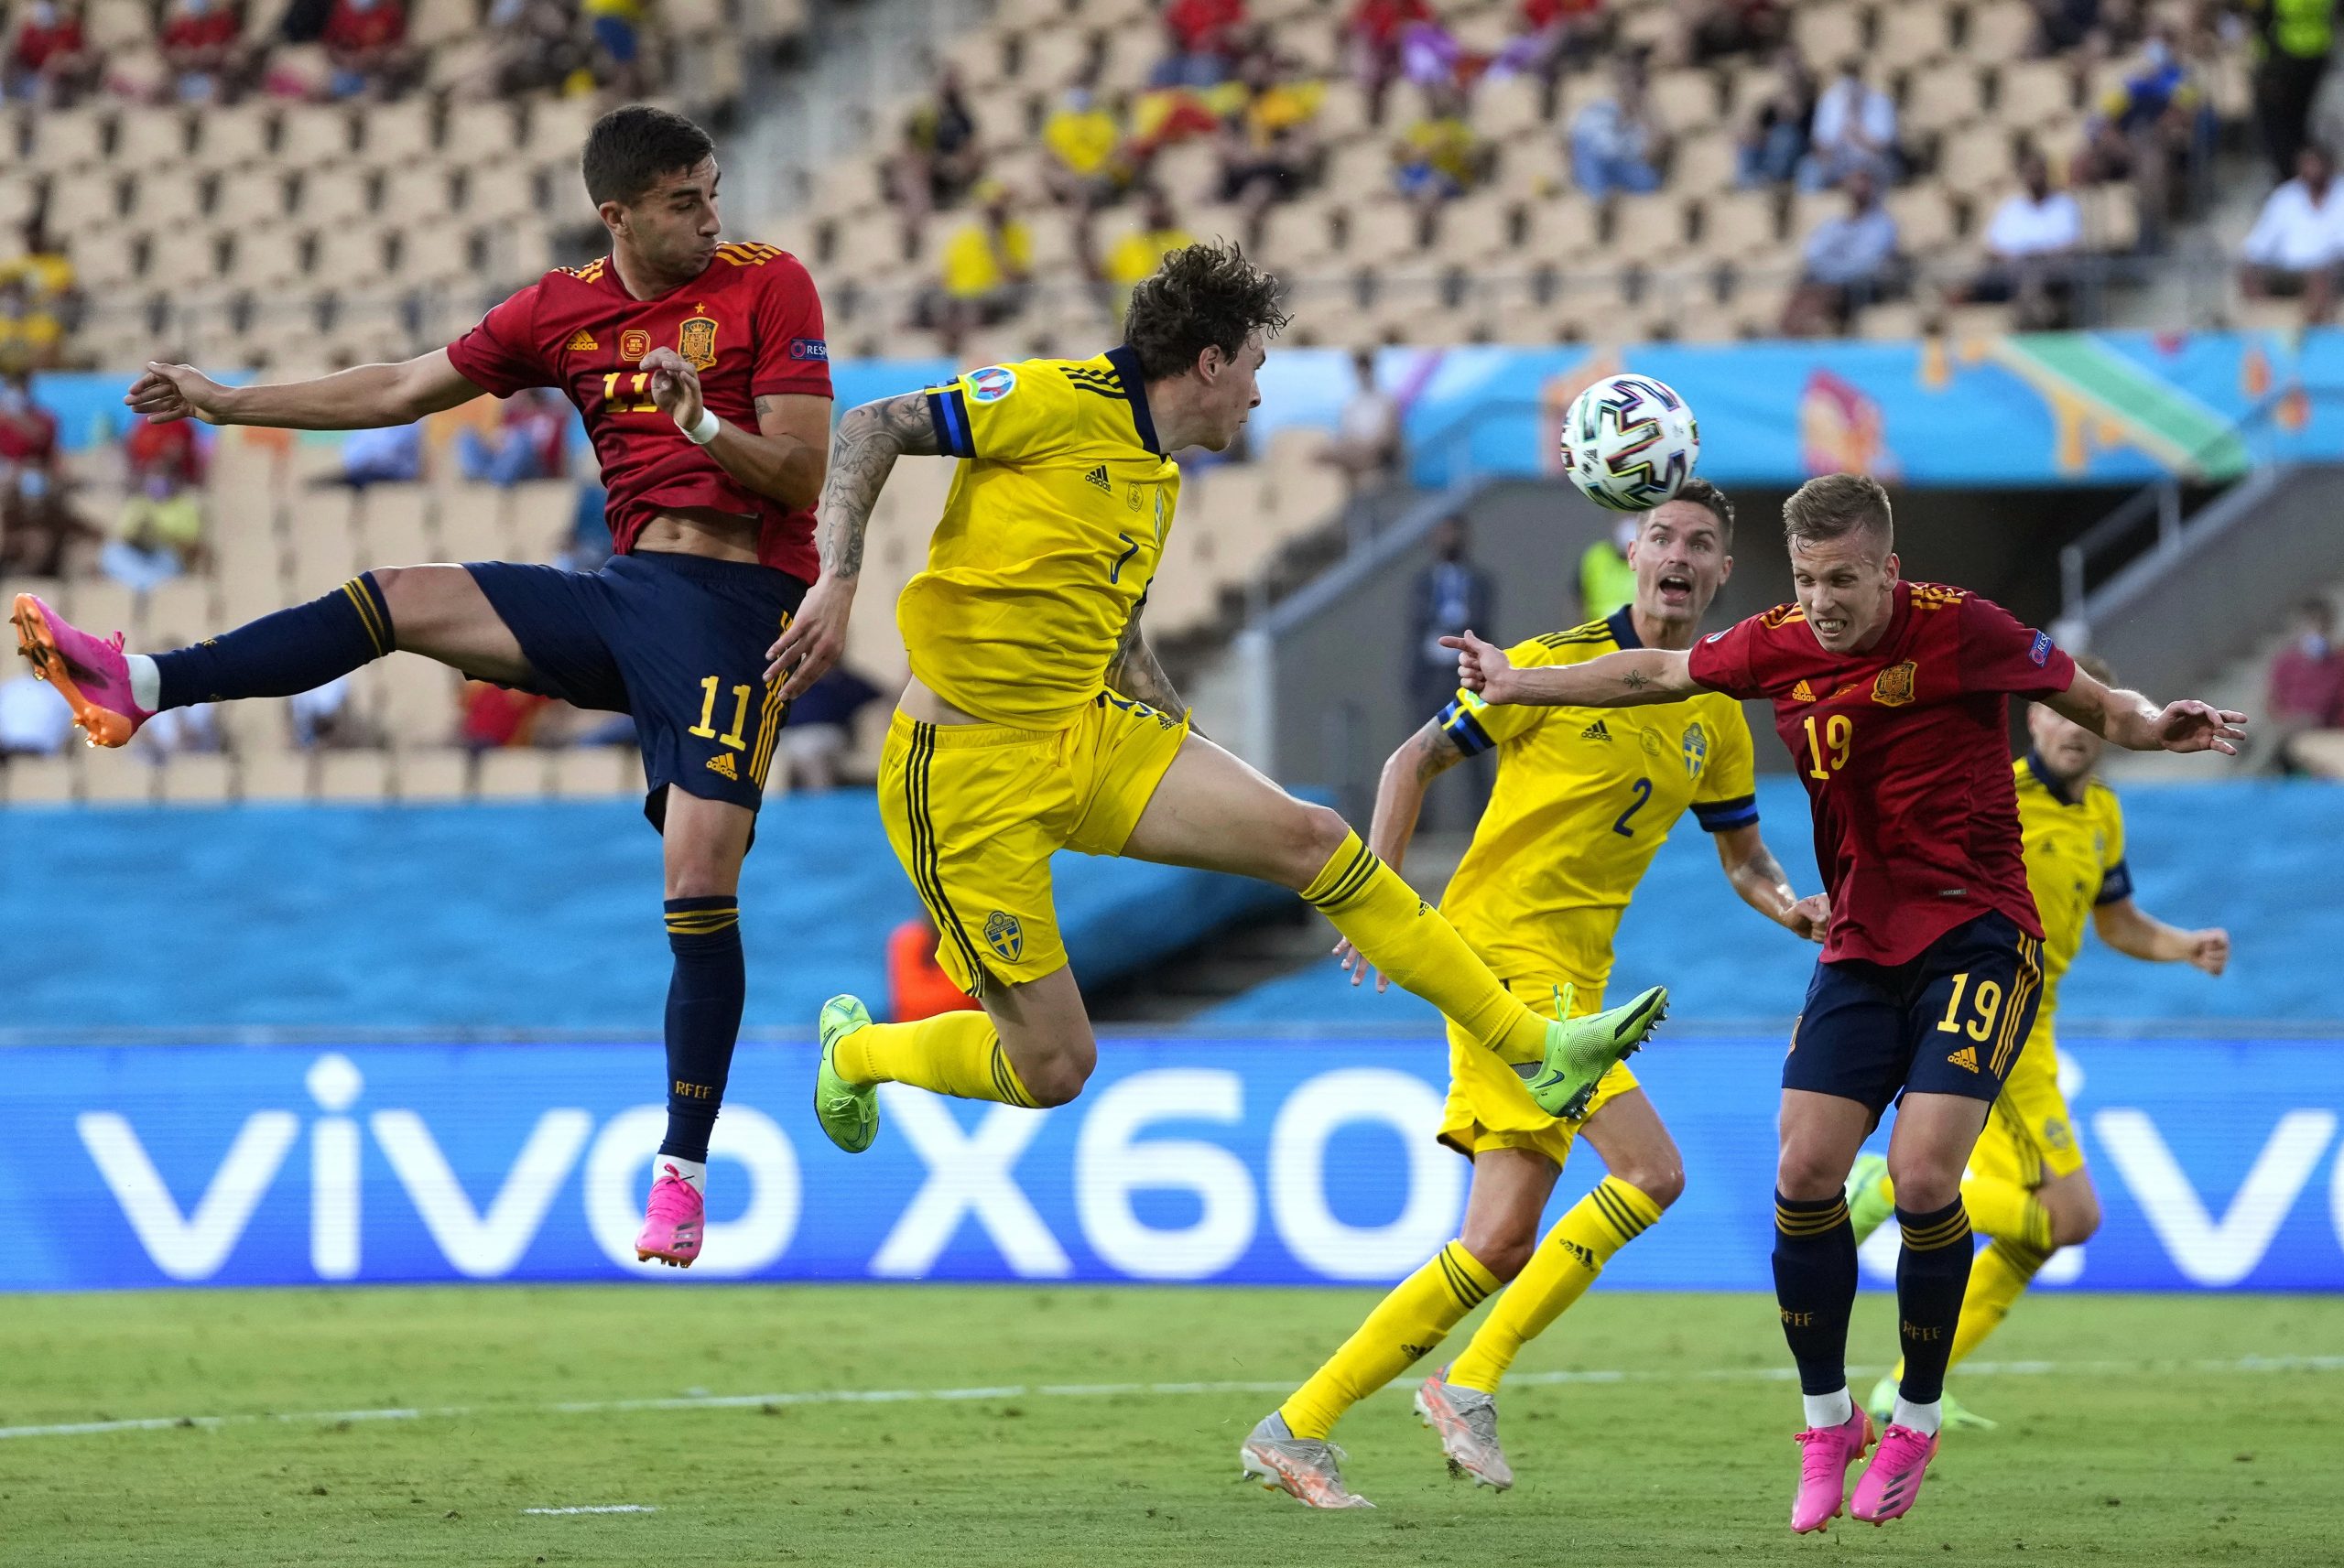 epa09271644 Dani Olmo (R) of Spain in action during the UEFA EURO 2020 group E preliminary round soccer match between Spain and Sweden in Seville, Spain, 14 June 2021.  EPA/Thanassis Stavrakis / POOL (RESTRICTIONS: For editorial news reporting purposes only. Images must appear as still images and must not emulate match action video footage. Photographs published in online publications shall have an interval of at least 20 seconds between the posting.)